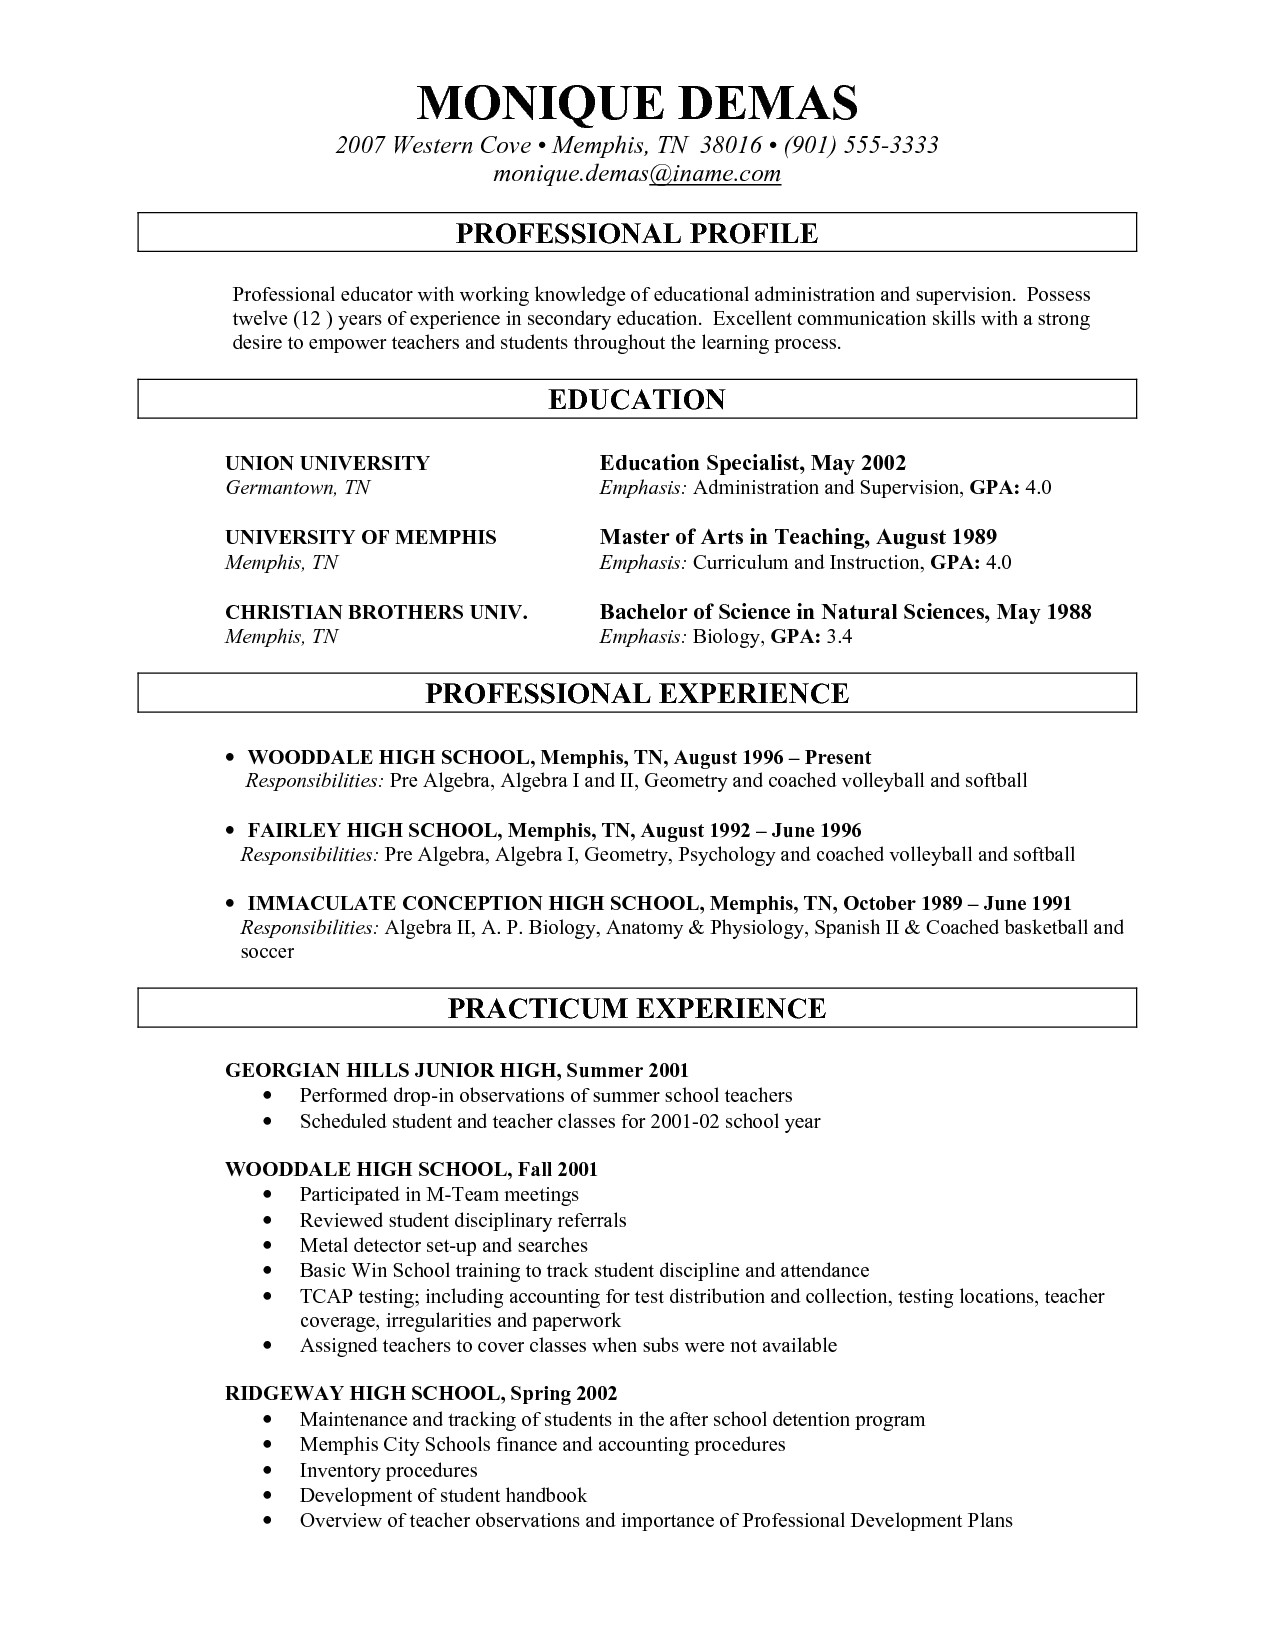 Resume Samples for Faculty Positions Sample Resume for Faculty Position Resume Ideas